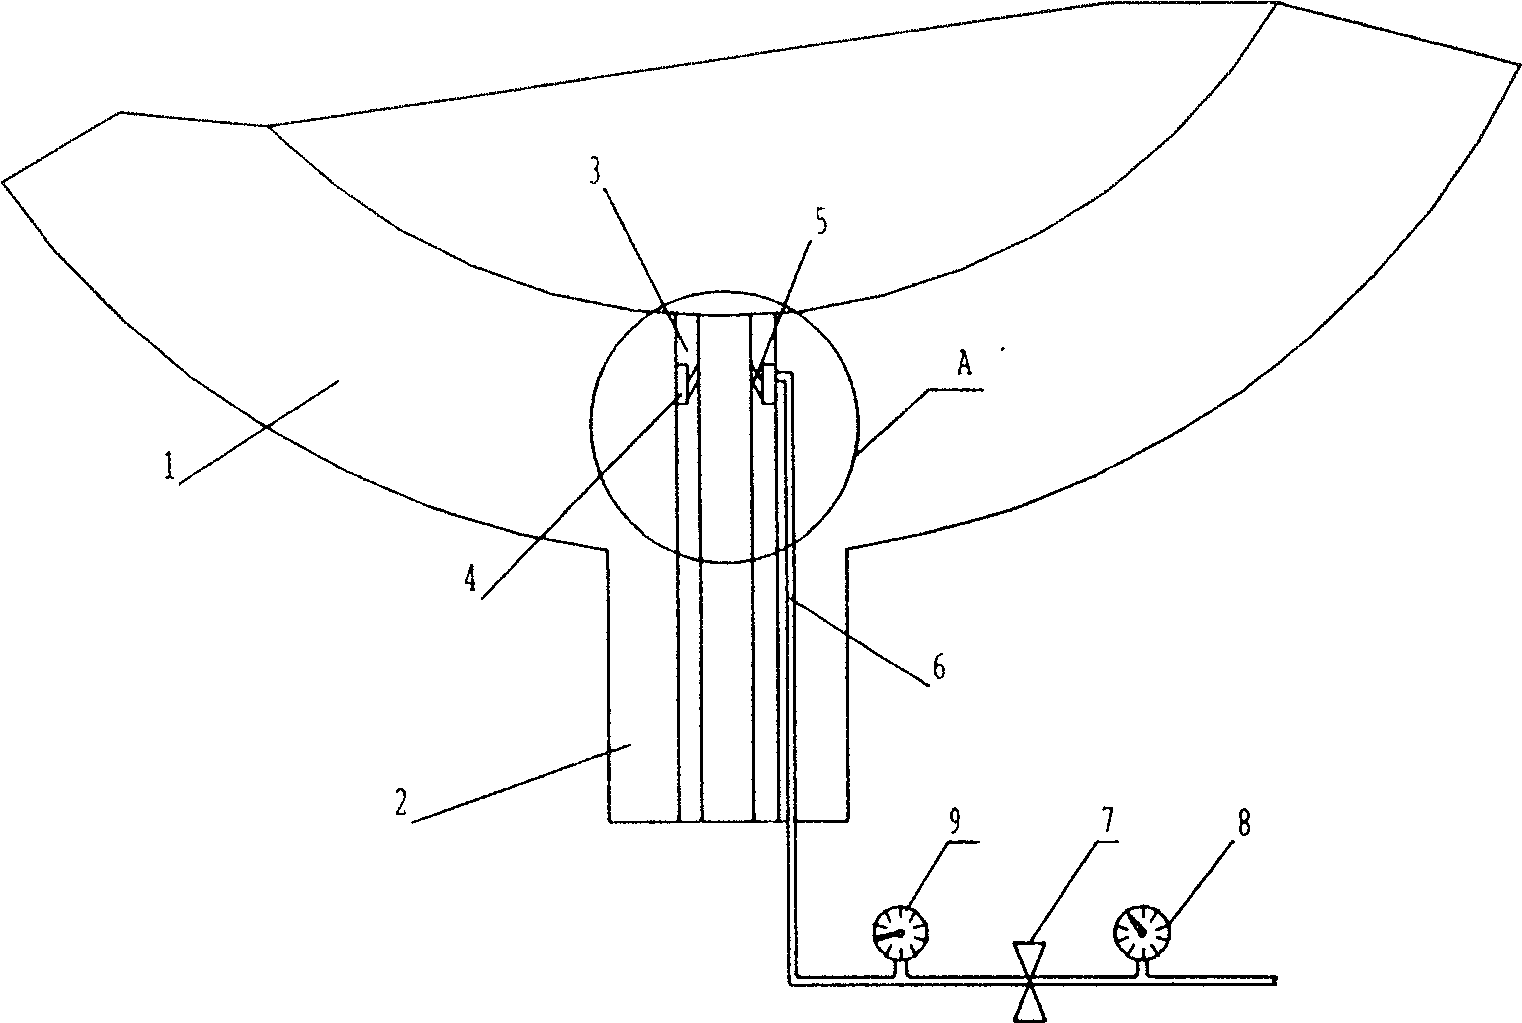 Air curtain skimming device for steel-making converter